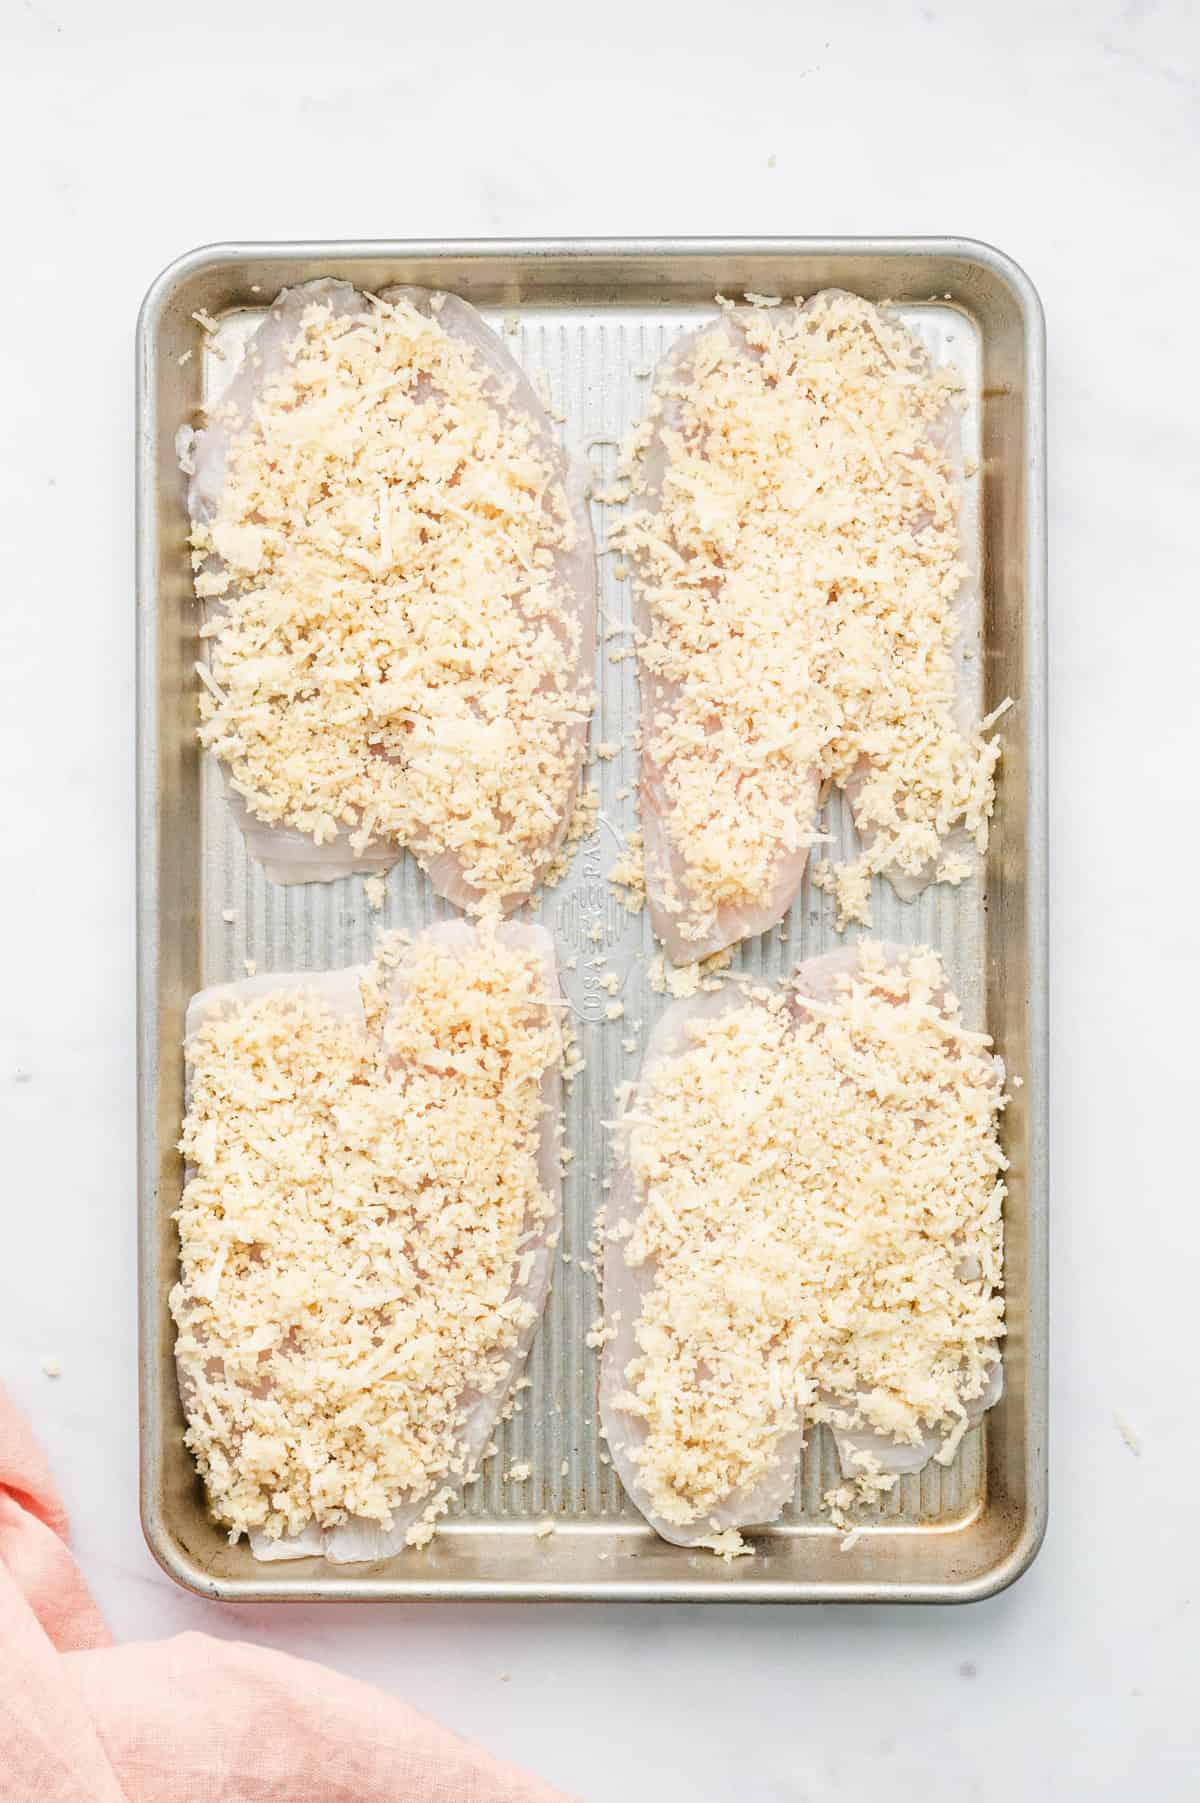 Coating tilapia filets with parmesan mixture on baking sheet for Parmesan Crusted Tilapia recipe